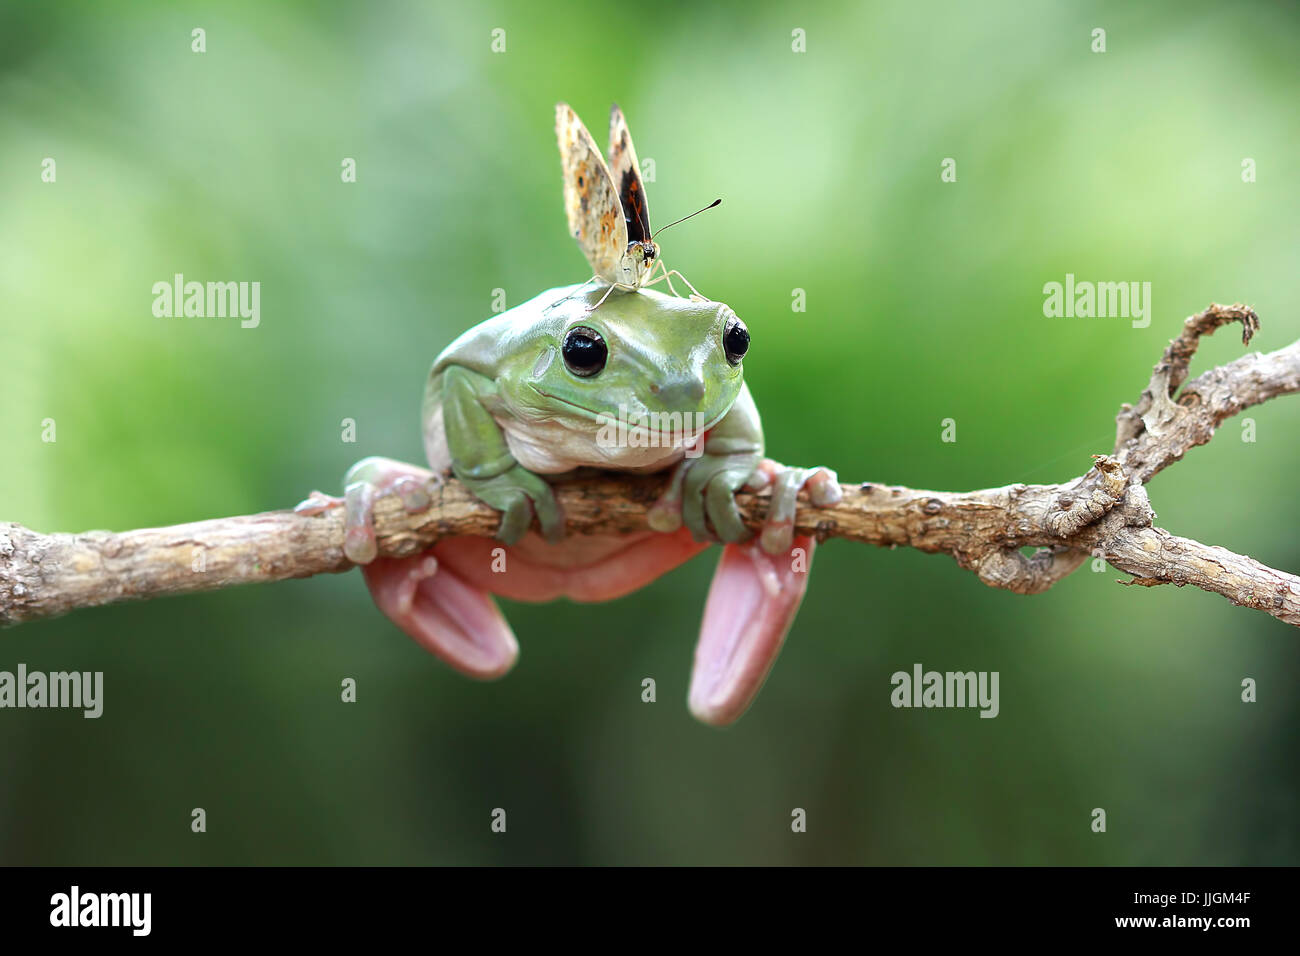 Butterfly on a dumpy frog, Indonesia Stock Photo